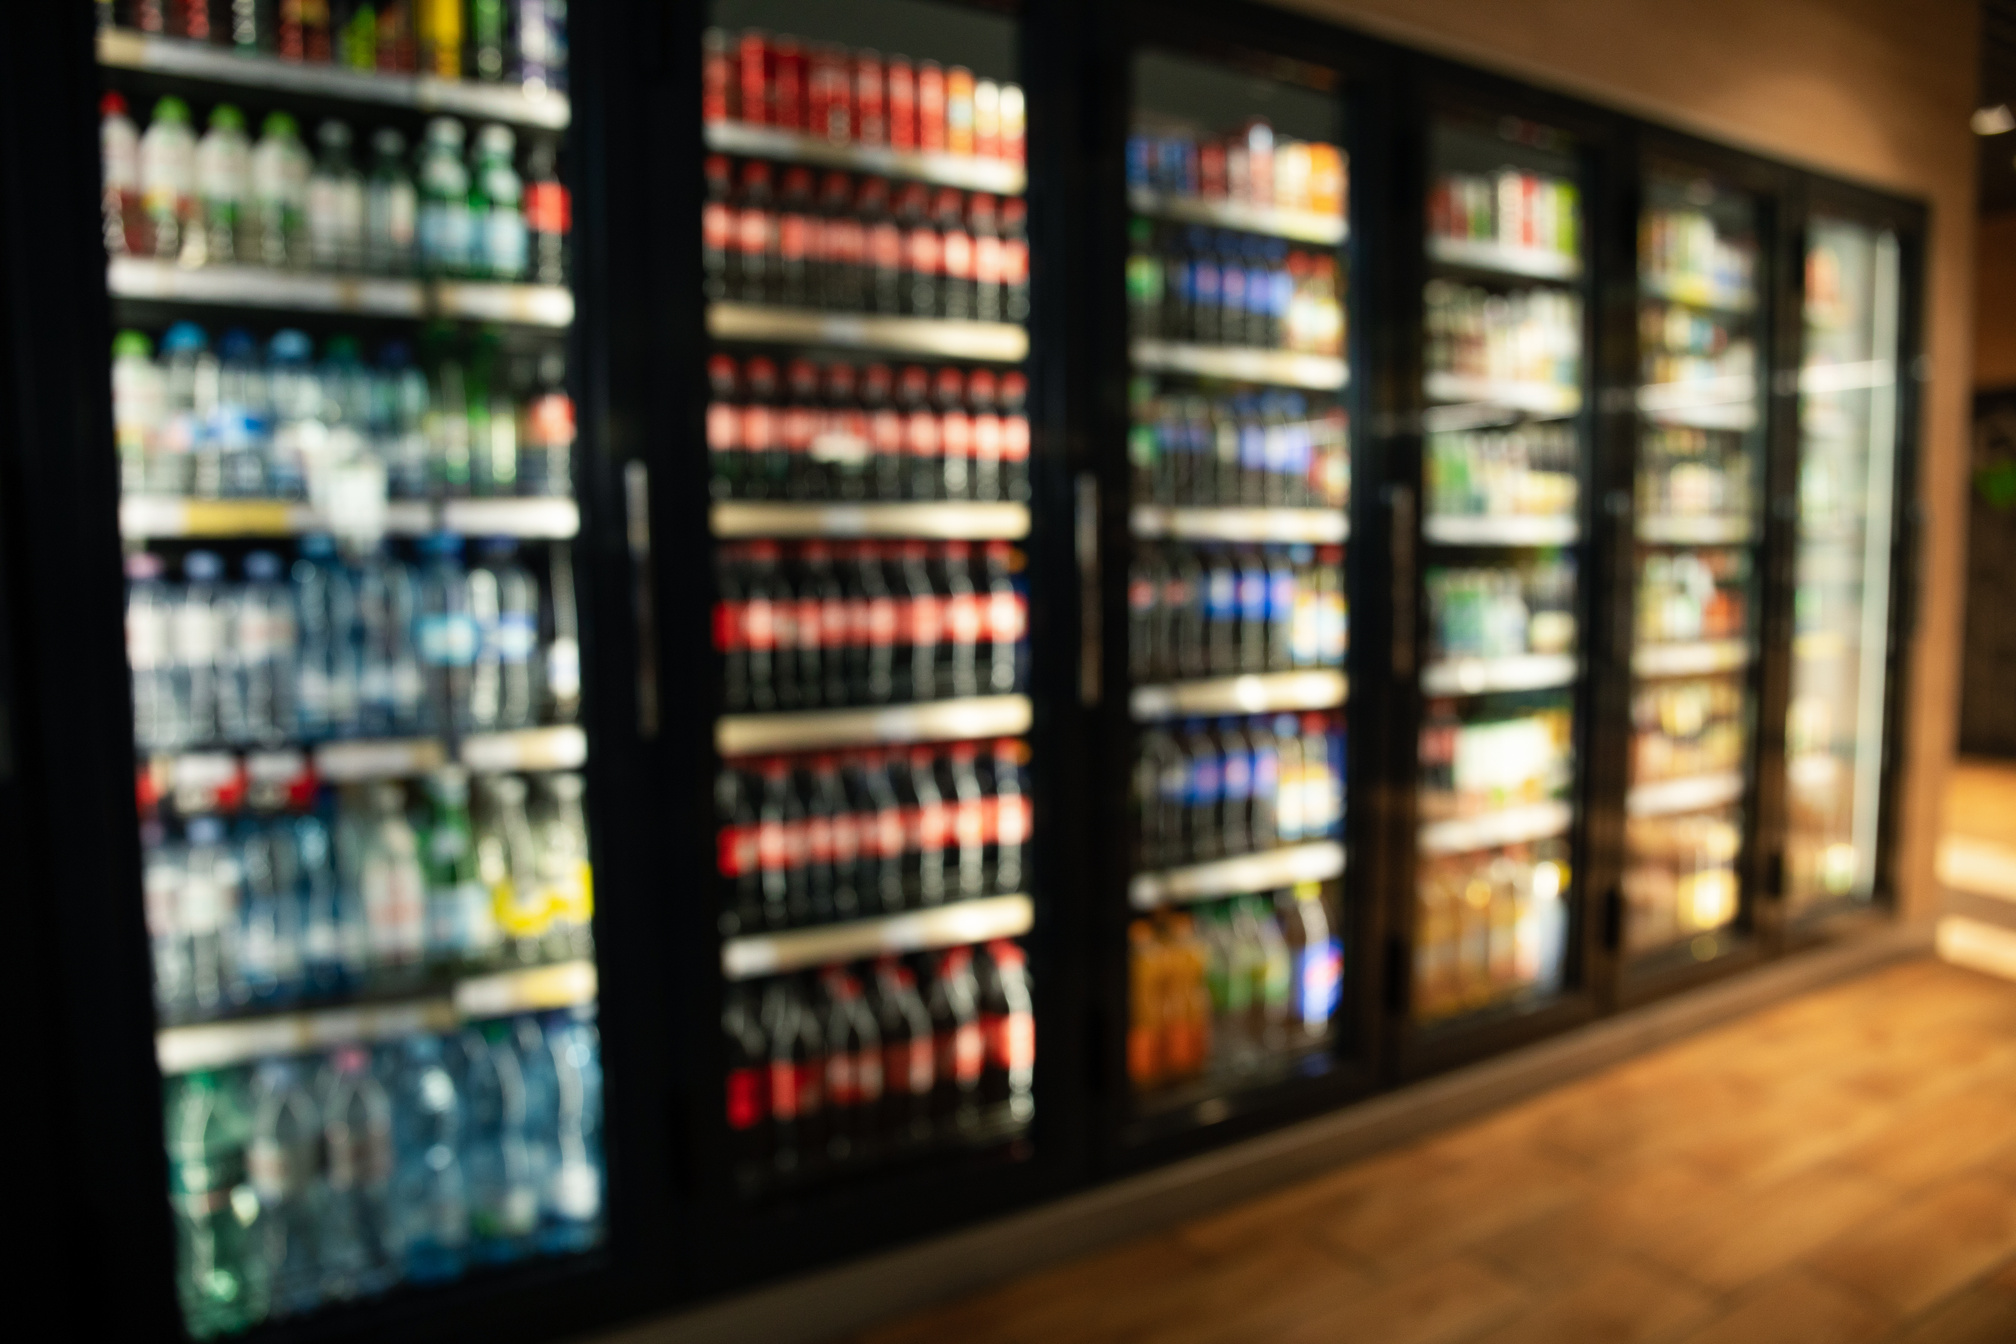 Supermarket convenience store refrigerators with different drink